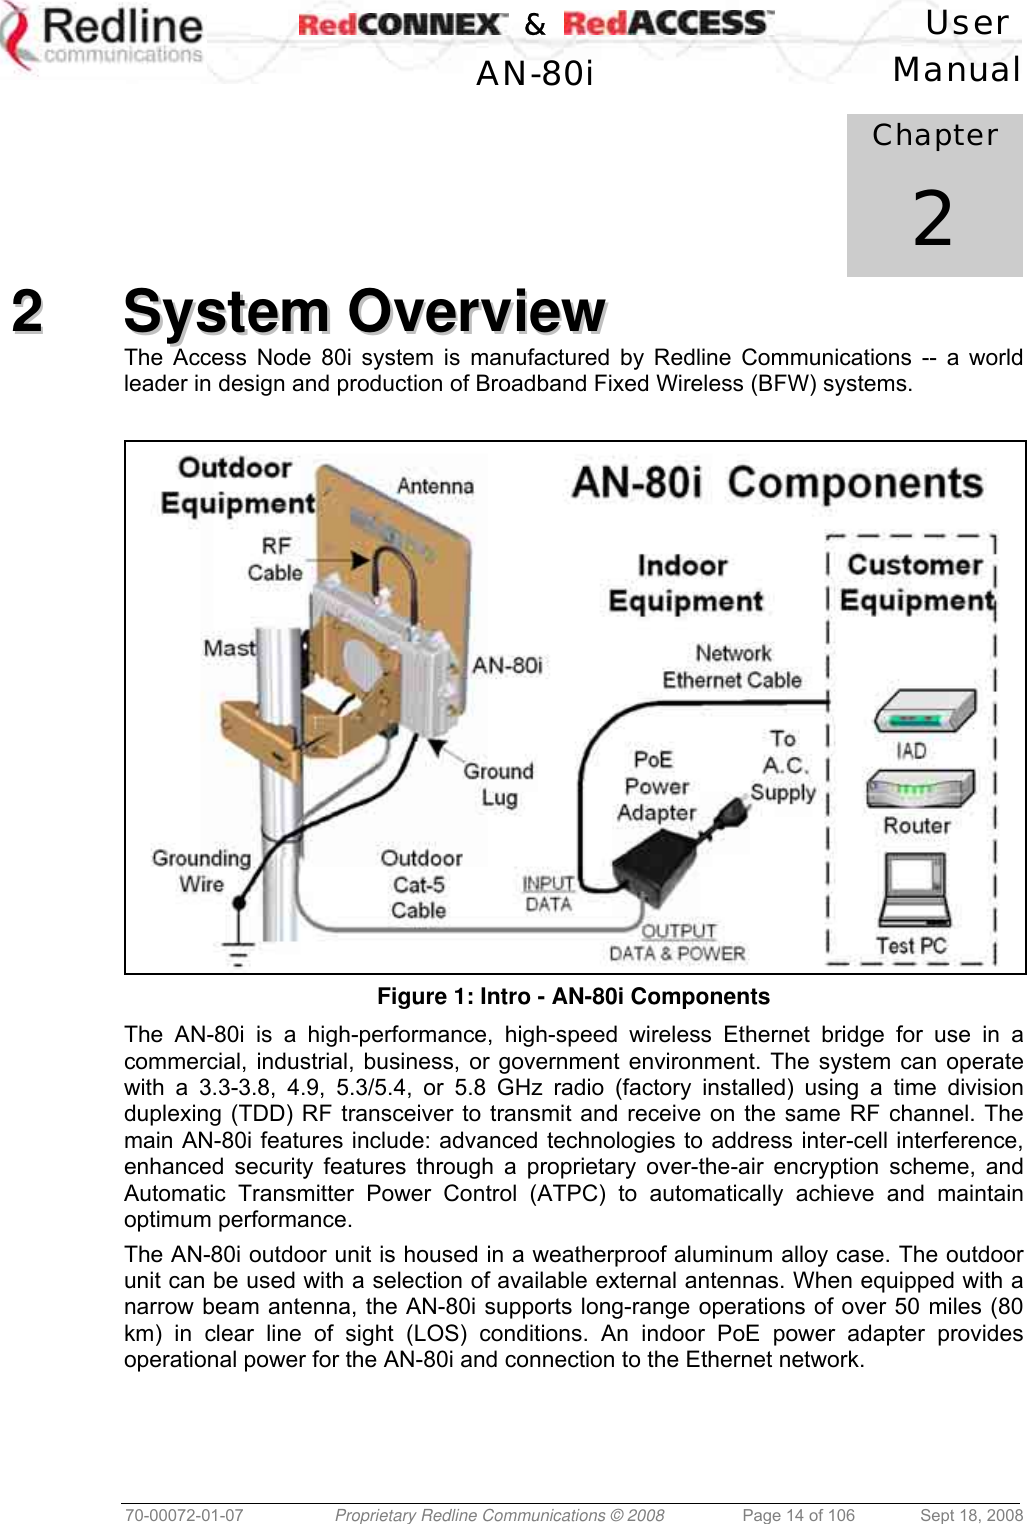    &amp;  User  AN-80i Manual  70-00072-01-07  Proprietary Redline Communications © 2008  Page 14 of 106  Sept 18, 2008            Chapter 2 22  SSyysstteemm  OOvveerrvviieeww  The Access Node 80i system is manufactured by Redline Communications -- a world leader in design and production of Broadband Fixed Wireless (BFW) systems.   Figure 1: Intro - AN-80i Components The AN-80i is a high-performance, high-speed wireless Ethernet bridge for use in a commercial, industrial, business, or government environment. The system can operate with a 3.3-3.8, 4.9, 5.3/5.4, or 5.8 GHz radio (factory installed) using a time division duplexing (TDD) RF transceiver to transmit and receive on the same RF channel. The main AN-80i features include: advanced technologies to address inter-cell interference, enhanced security features through a proprietary over-the-air encryption scheme, and Automatic Transmitter Power Control (ATPC) to automatically achieve and maintain optimum performance. The AN-80i outdoor unit is housed in a weatherproof aluminum alloy case. The outdoor unit can be used with a selection of available external antennas. When equipped with a narrow beam antenna, the AN-80i supports long-range operations of over 50 miles (80 km) in clear line of sight (LOS) conditions. An indoor PoE power adapter provides operational power for the AN-80i and connection to the Ethernet network. 